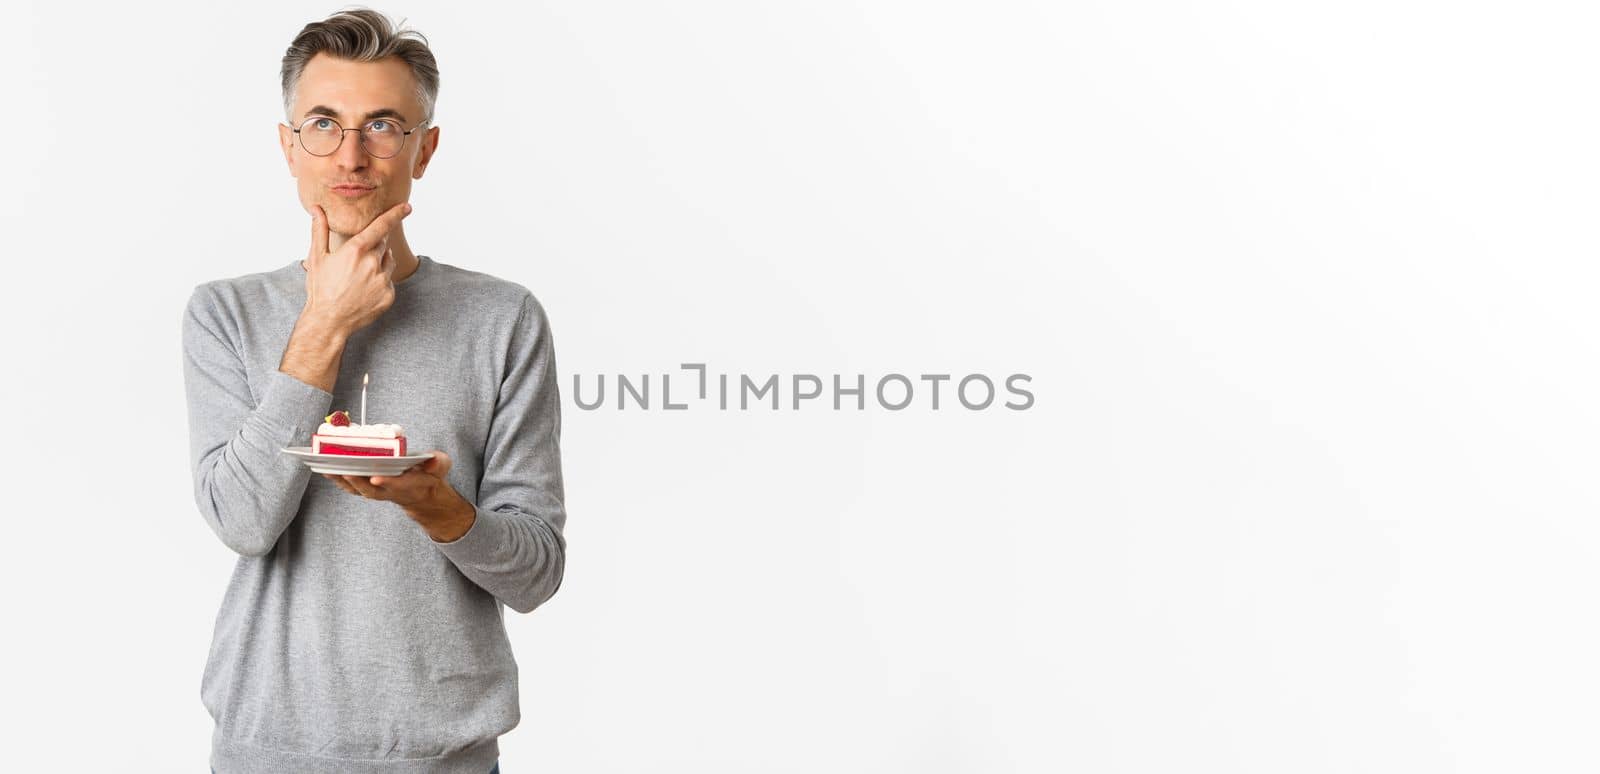 Image of thoughtful and serious middle-aged man, celebrating birthday, holding b-day cake and thinking what wish to make, standing over white background.